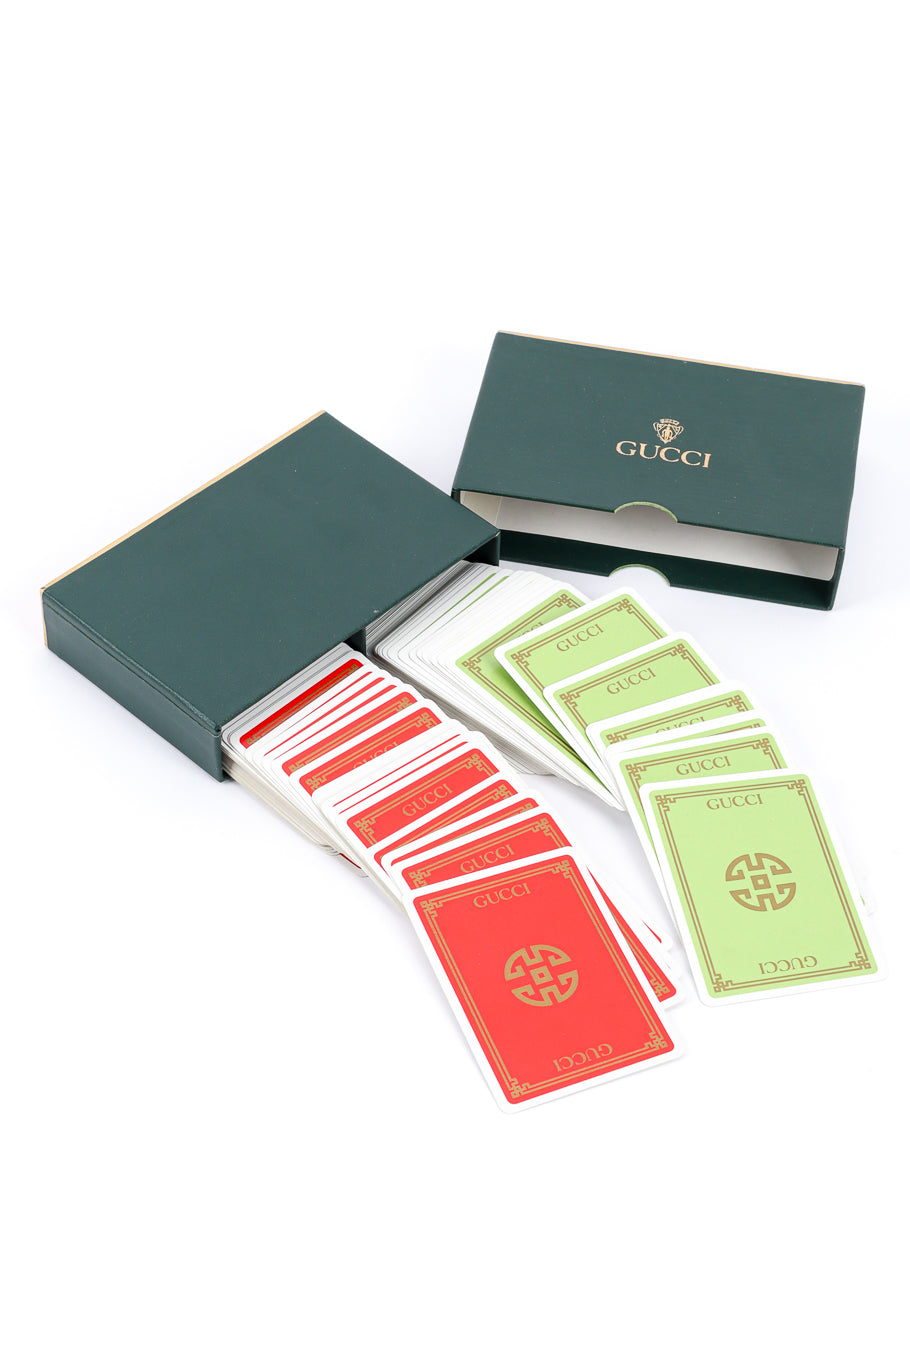 Vintage Gucci Red & Green 2 Deck Playing Card Set II decks fanned out @recessla